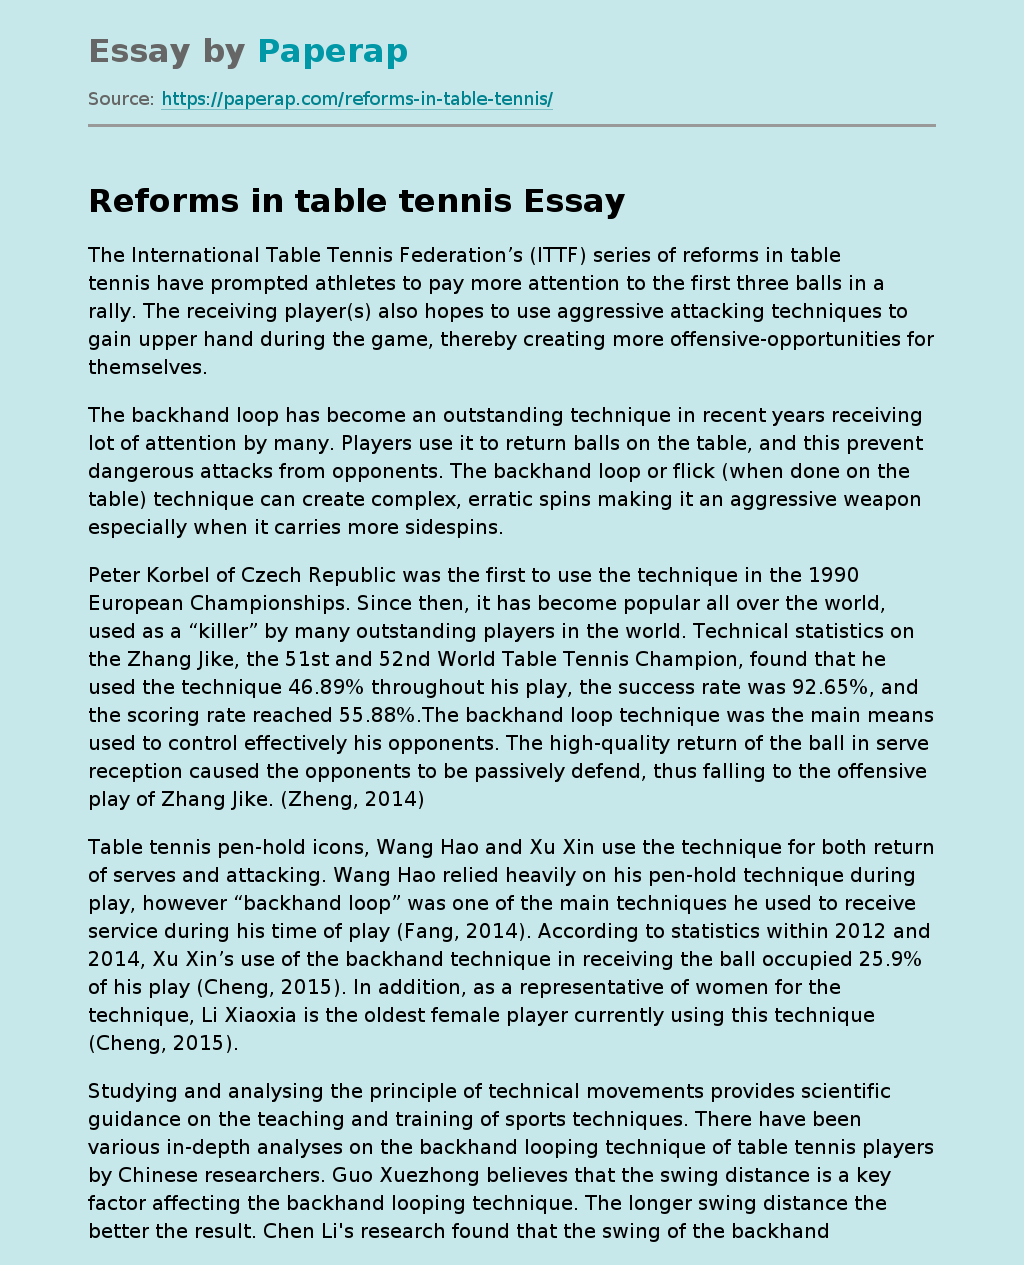 Reforms in table tennis